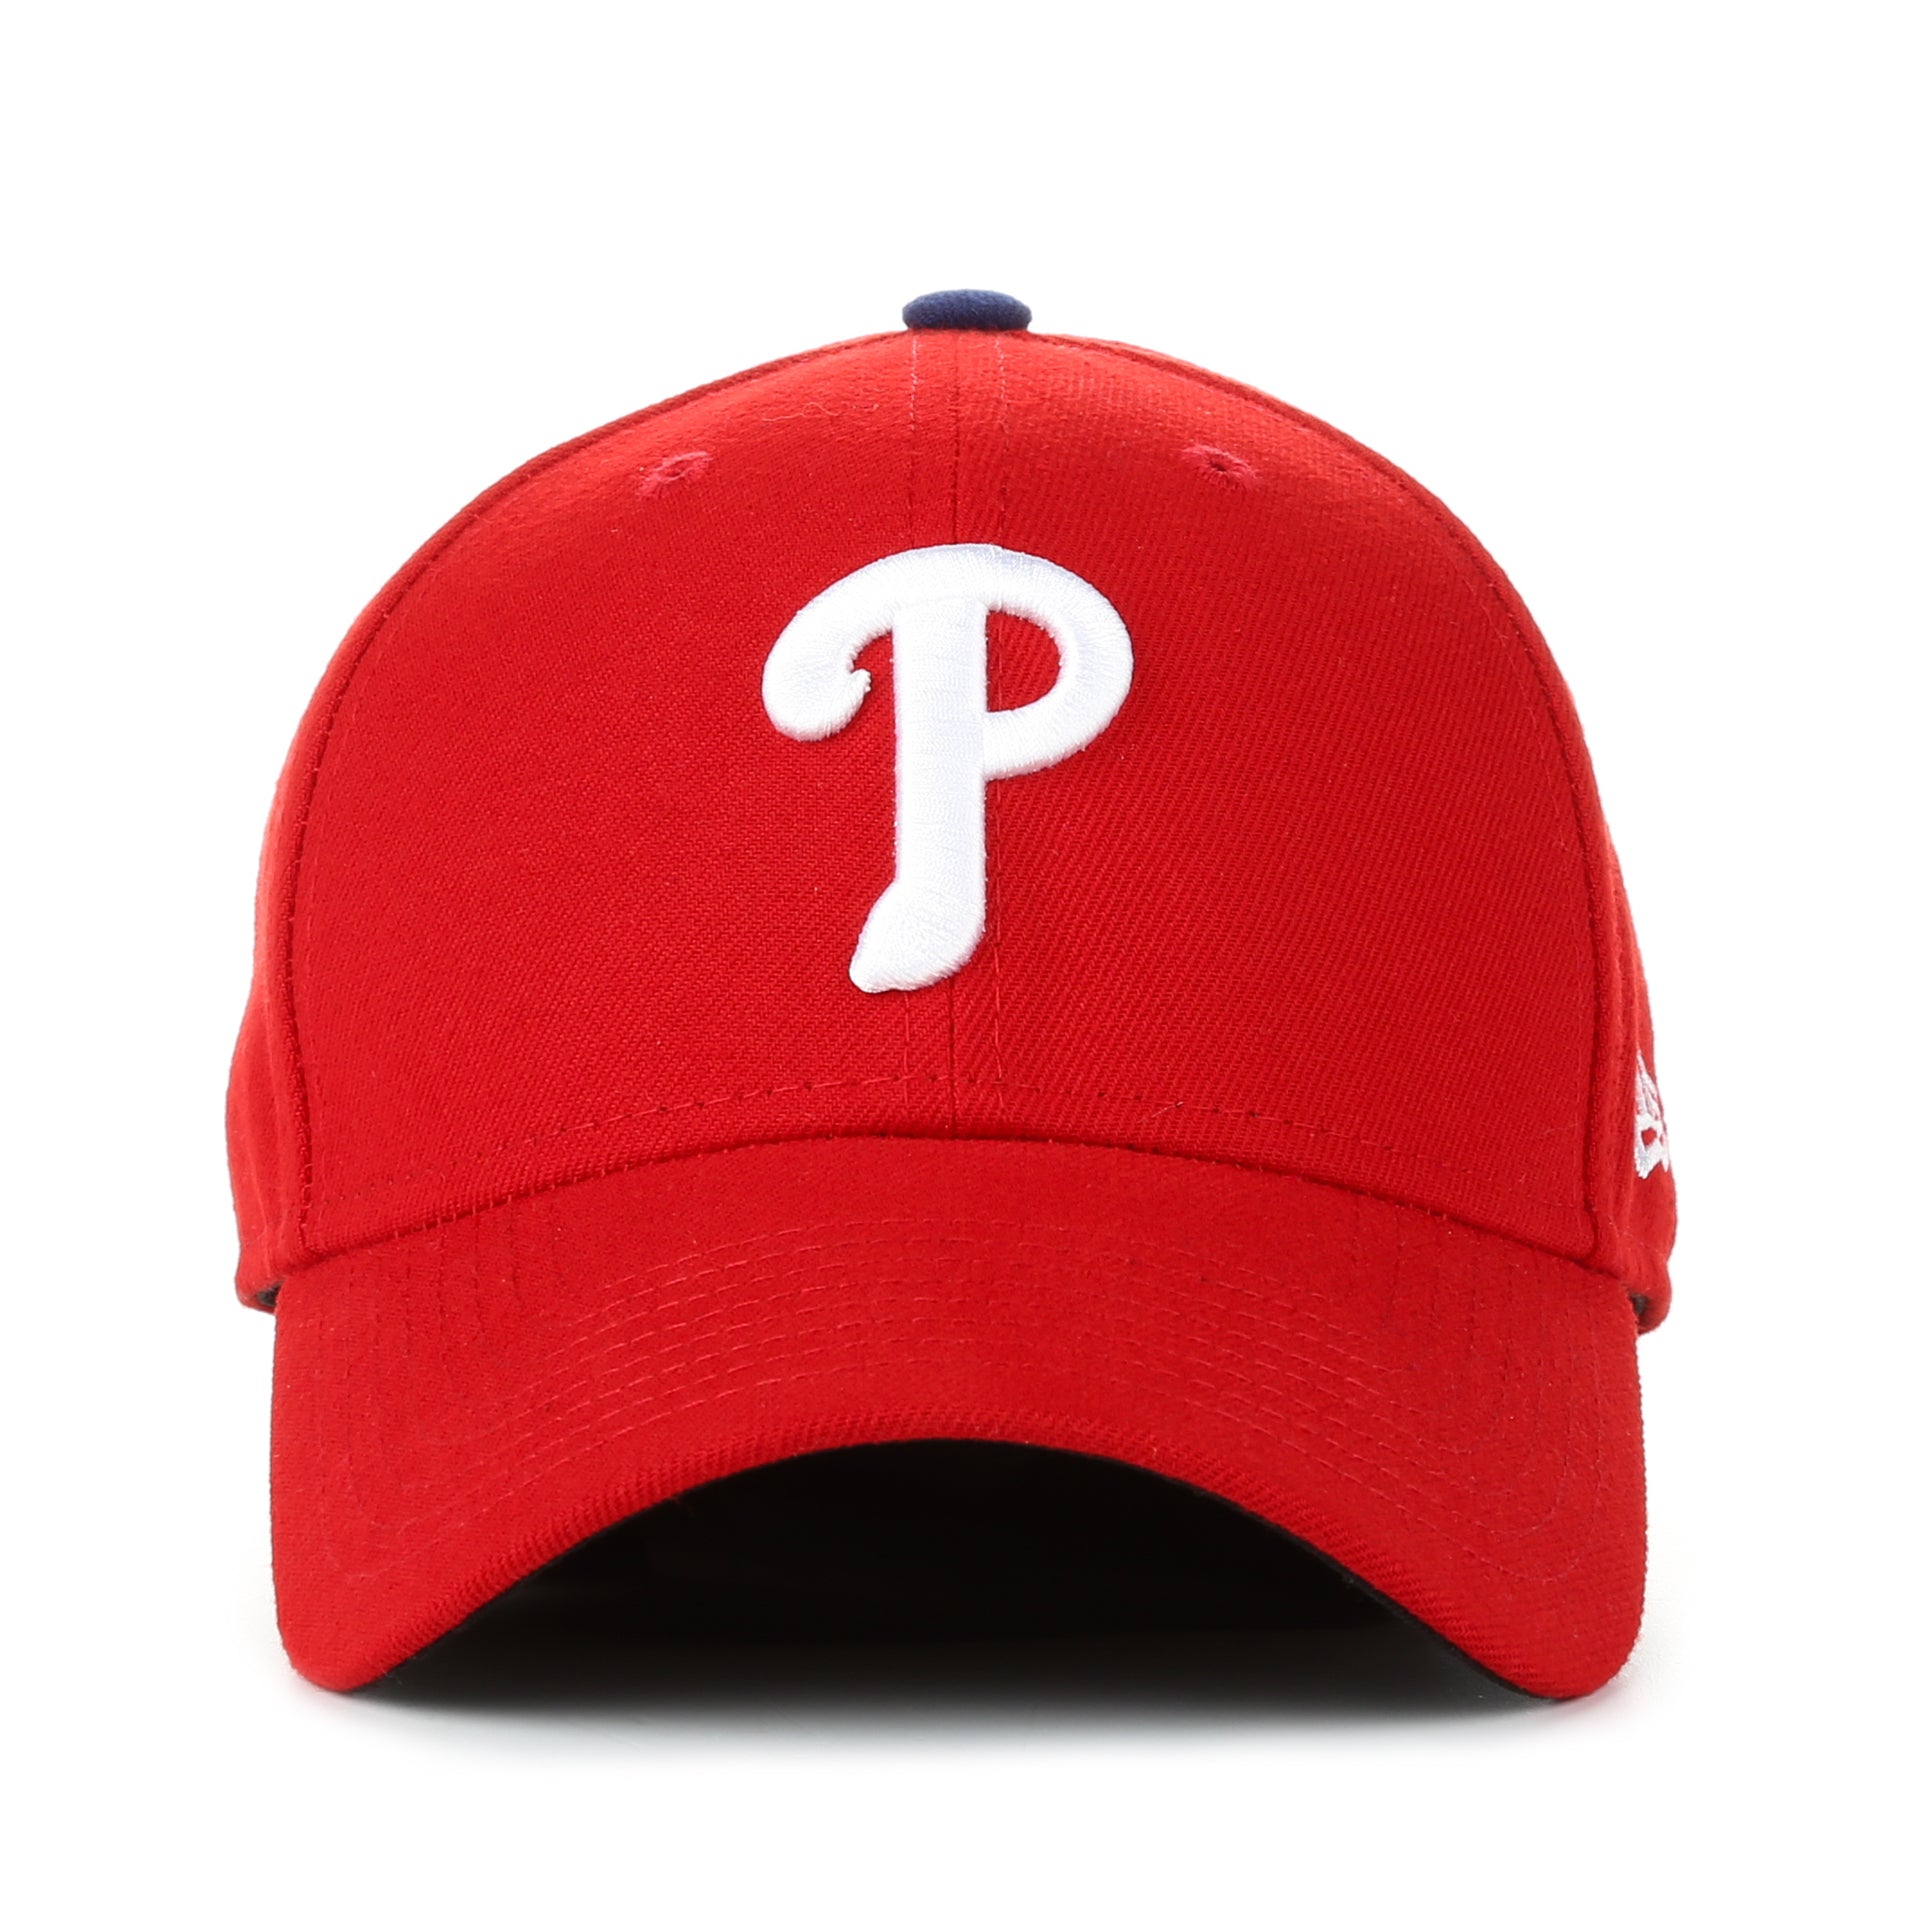 New Era 9Forty The League Game Cap - Philadelphia Phillies/Red - New Star